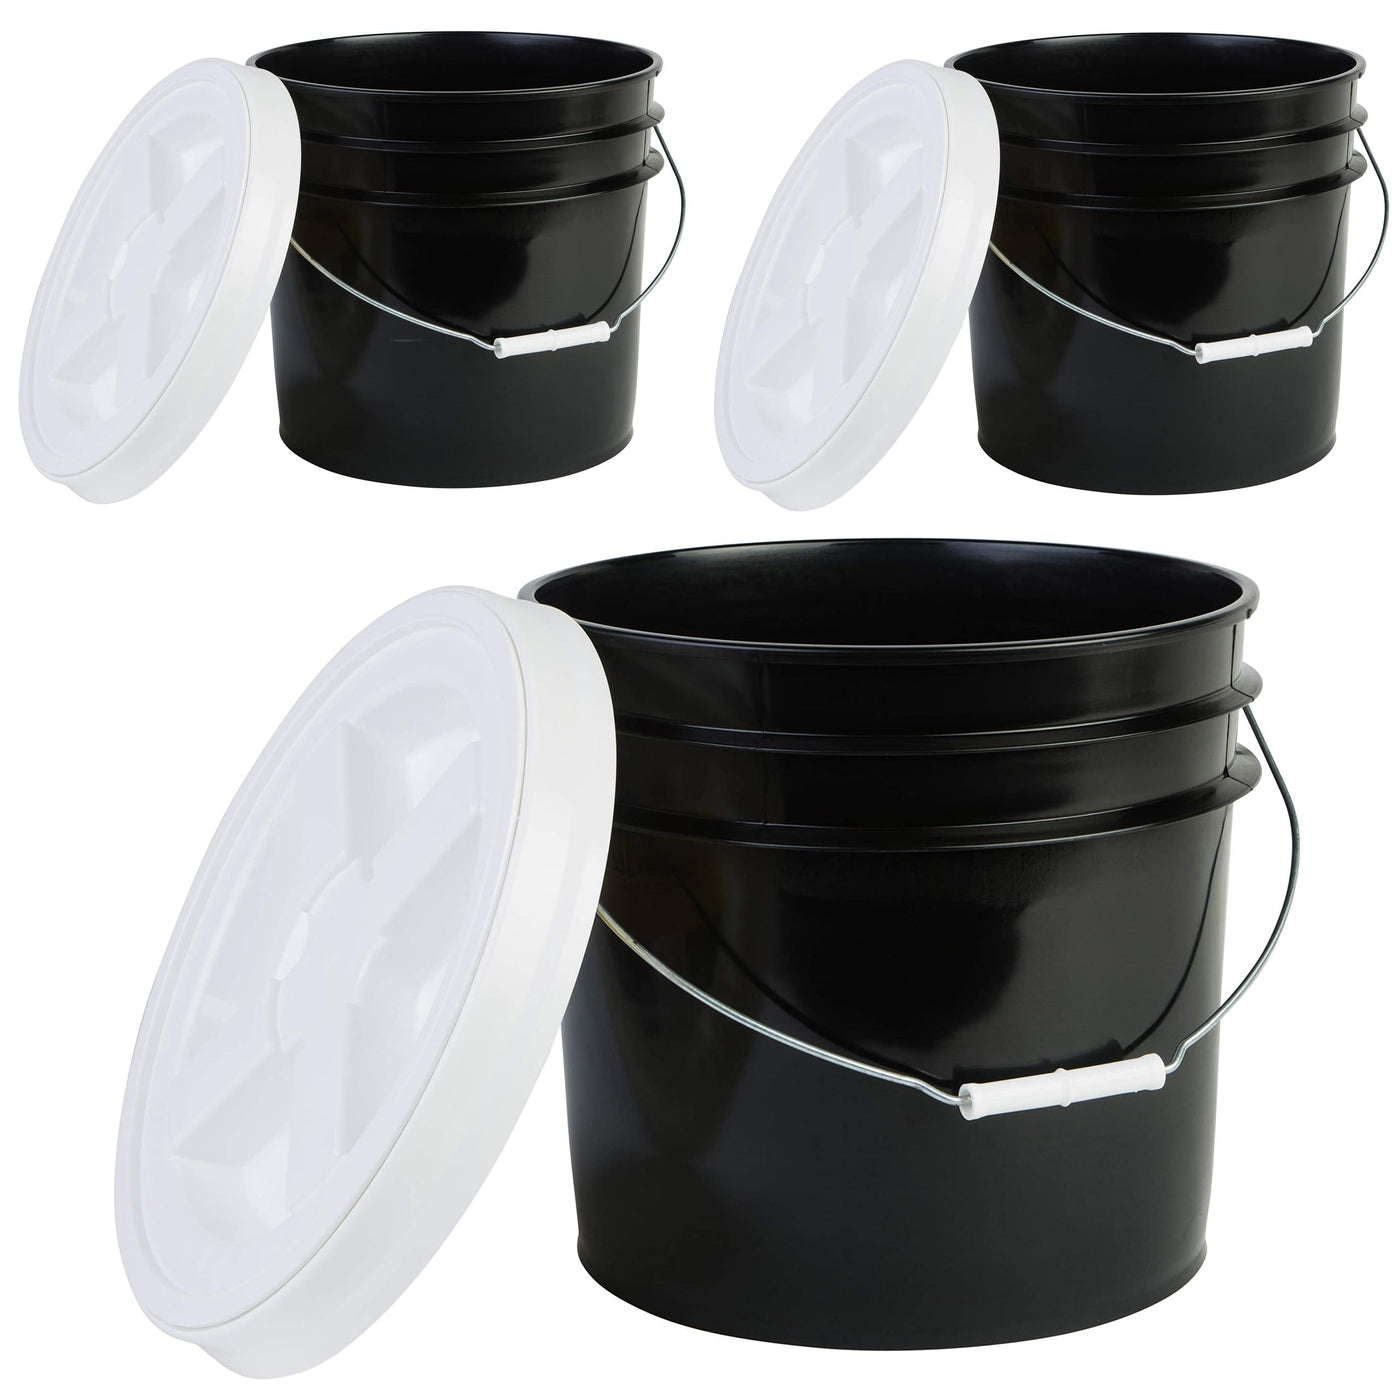 3.5 Gallon API Black Bucket with Gamma Seal Lid (red)